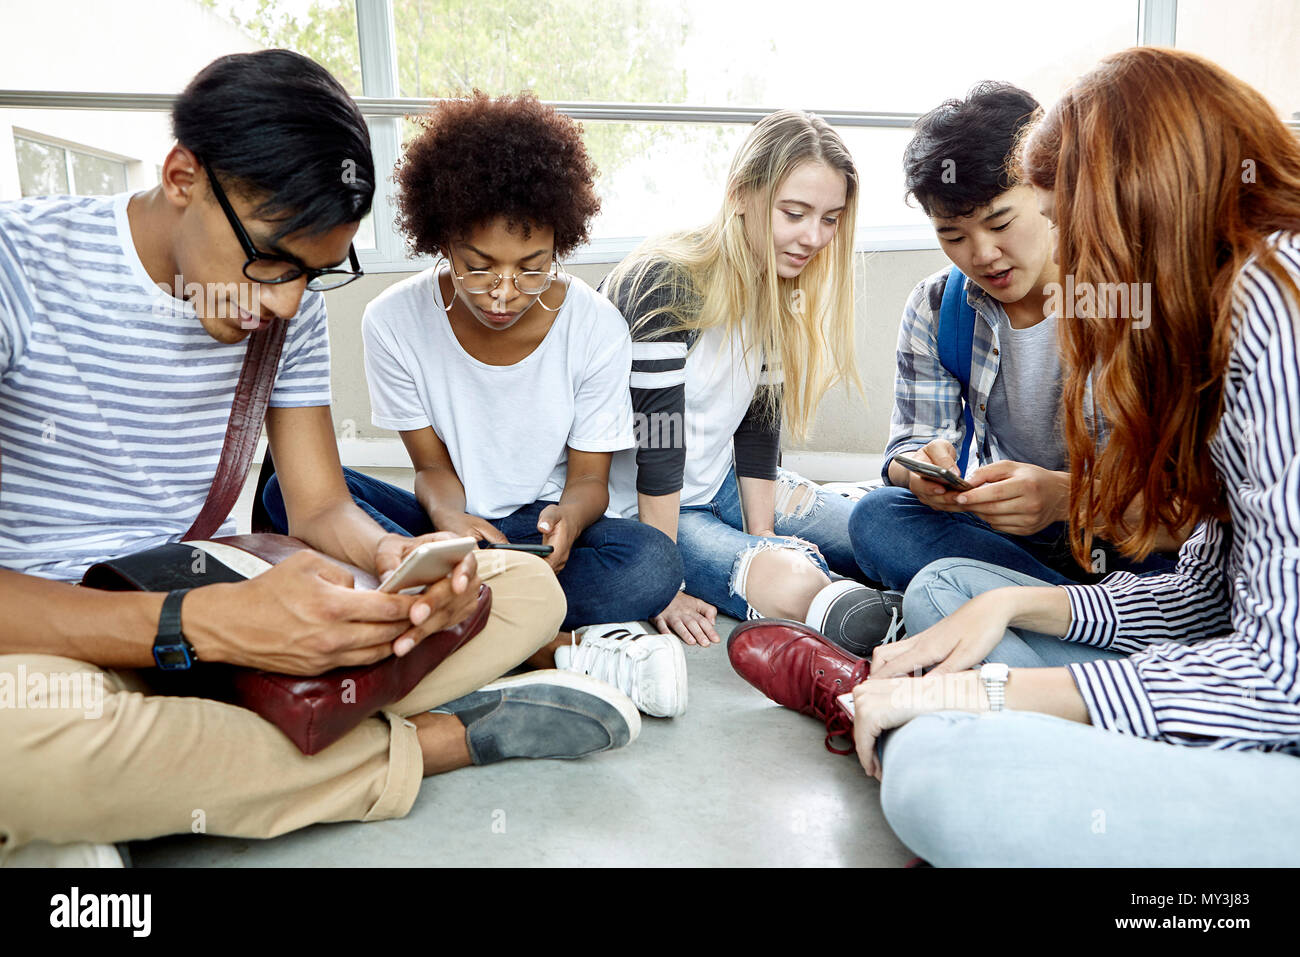 Students sitting together using smart phones Stock Photo